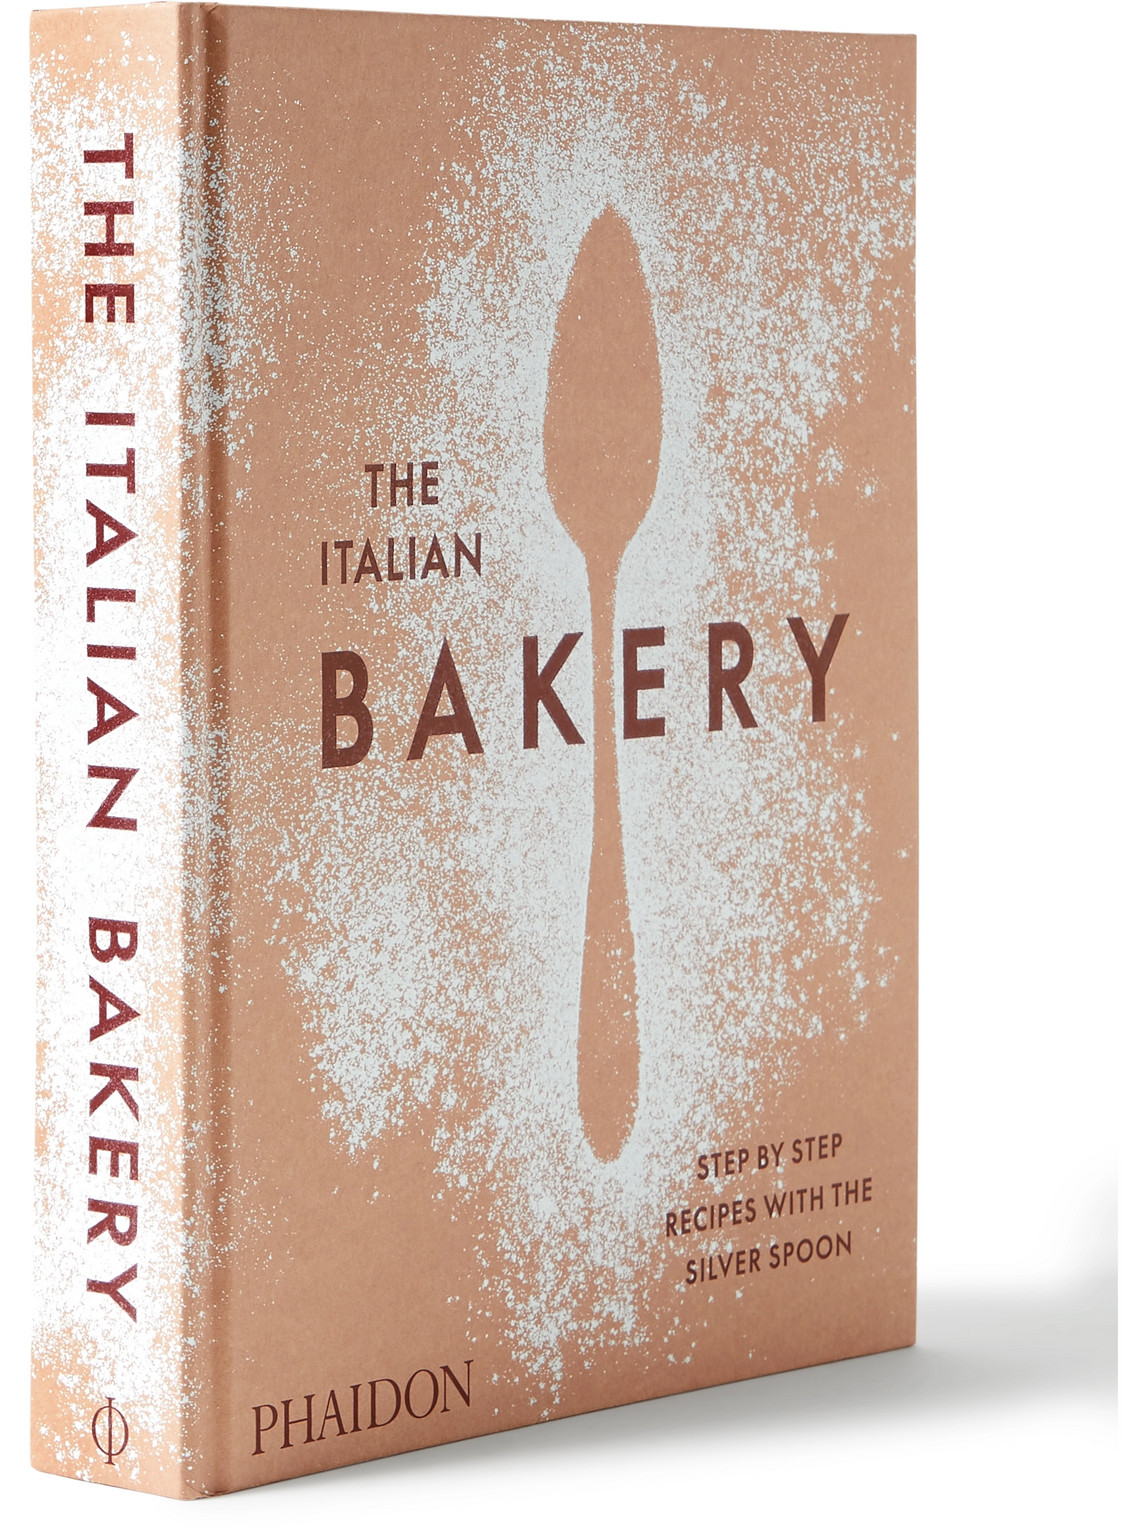 Phaidon The Italian Bakery: Step-by-step Recipes With The Silver Spoon Hardcover Cookbook In Neutrals